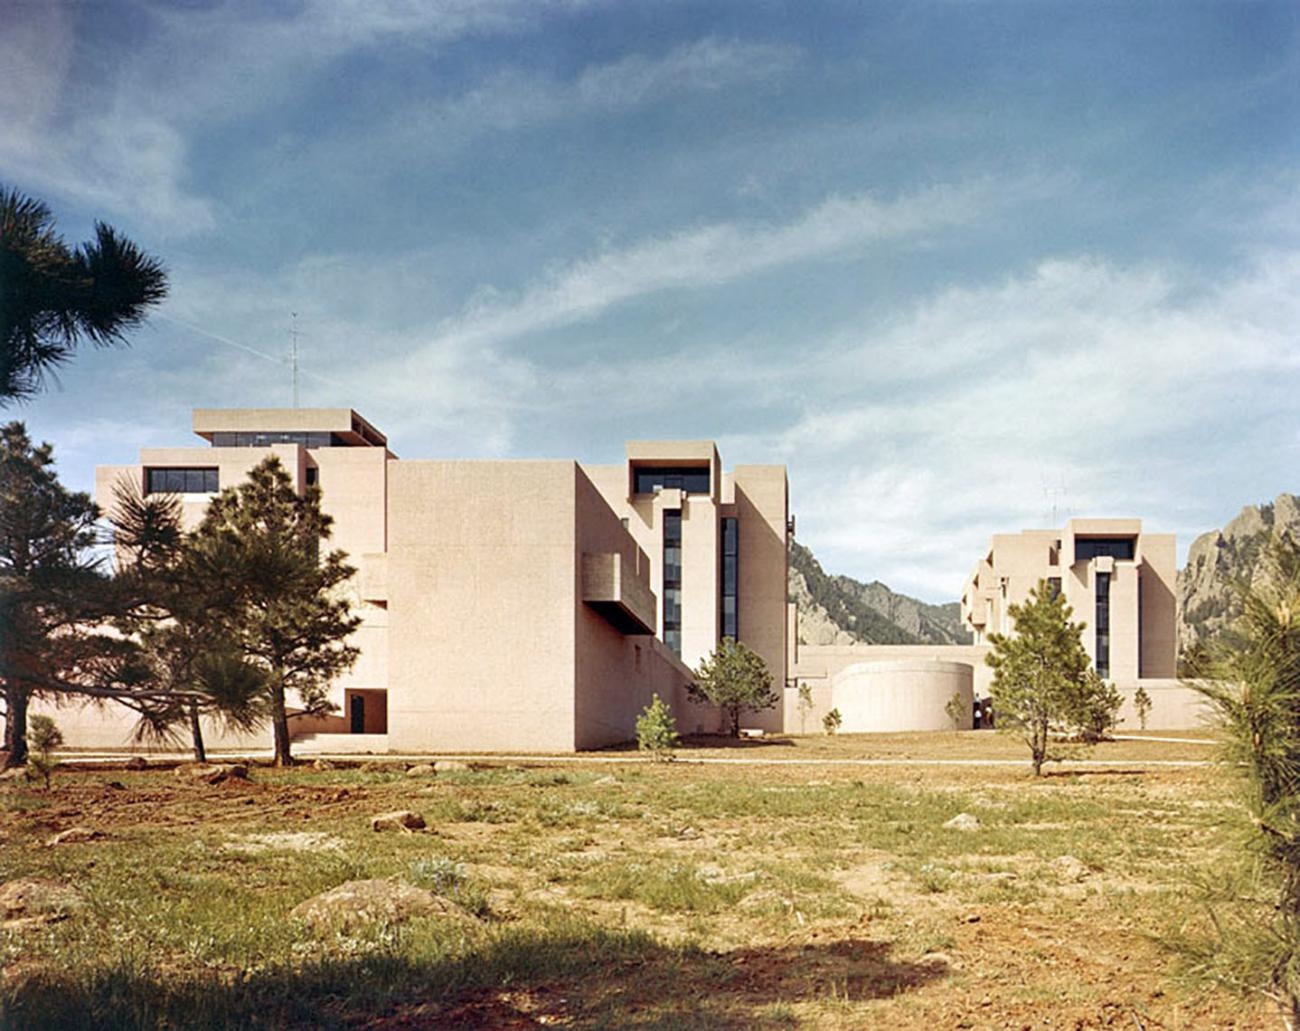 National Center for Atmospheric Research, Mesa Laboratory